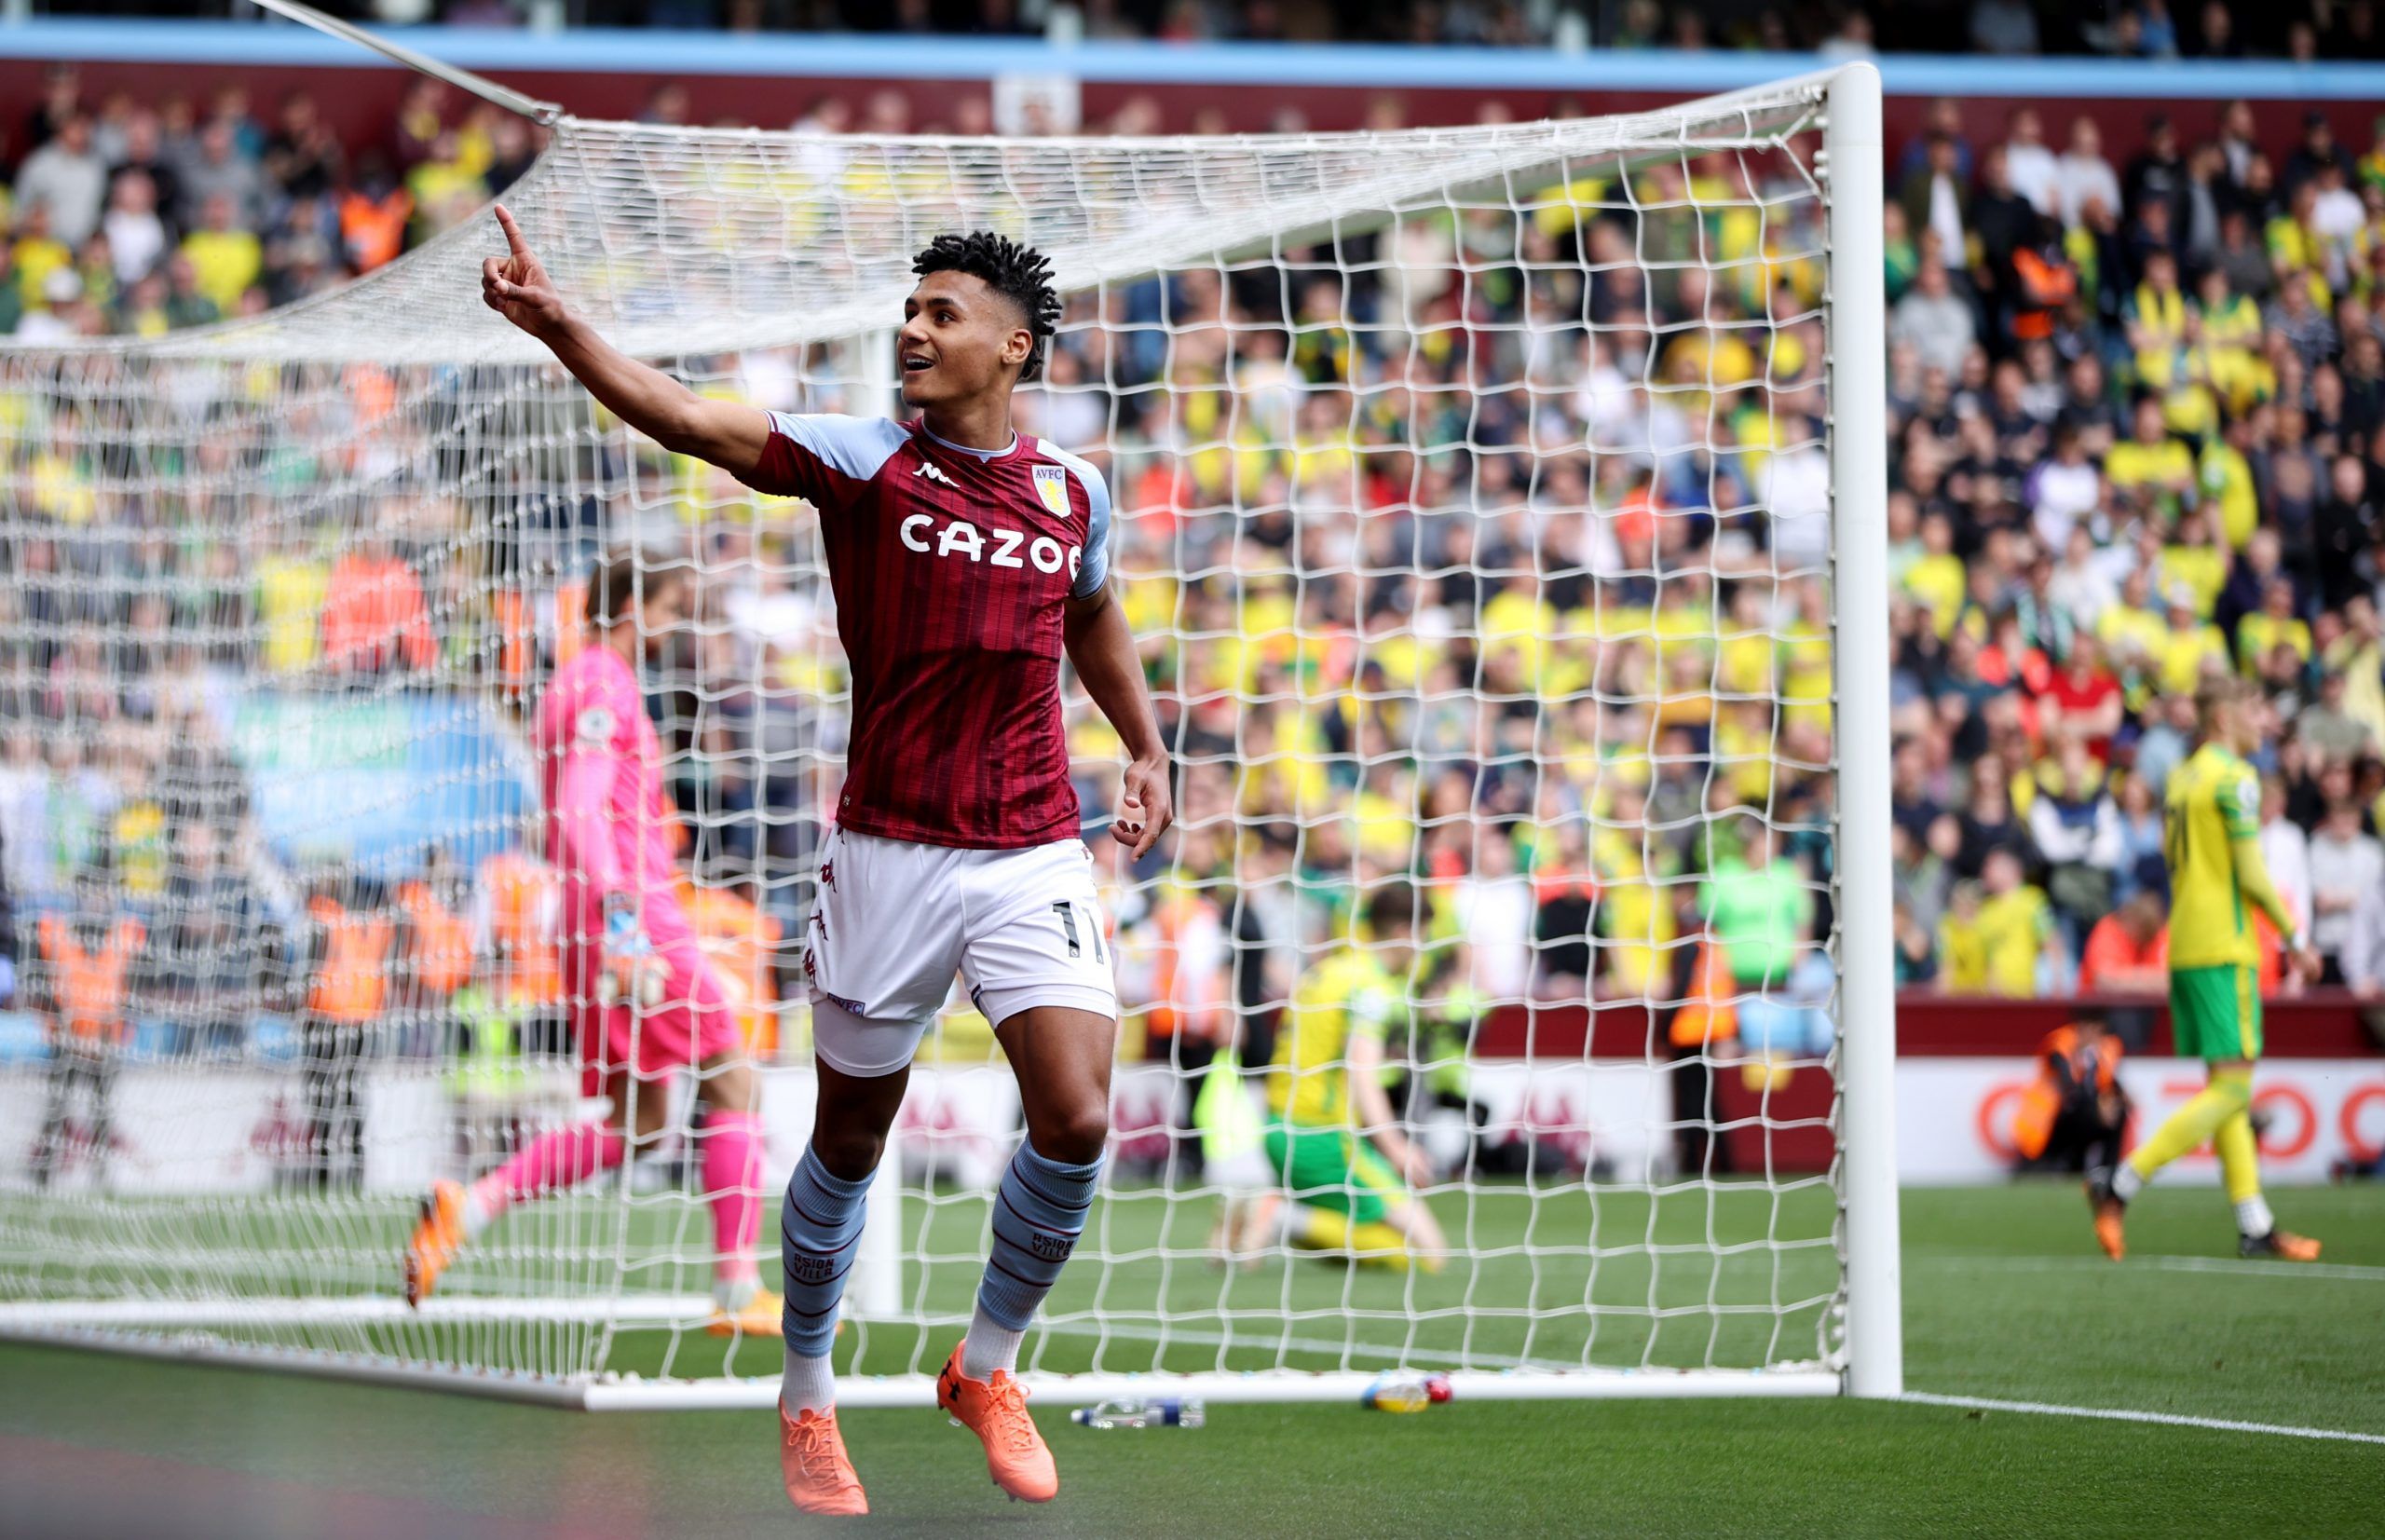 Soccer Football - Premier League - Aston Villa v Norwich City - Villa Park, Birmingham, Britain - April 30, 2022 Aston Villa's Ollie Watkins celebrates scoring their first goal Action Images via Reuters/Molly Darlington EDITORIAL USE ONLY. No use with unauthorized audio, video, data, fixture lists, club/league logos or 'live' services. Online in-match use limited to 75 images, no video emulation. No use in betting, games or single club /league/player publications.  Please contact your account re